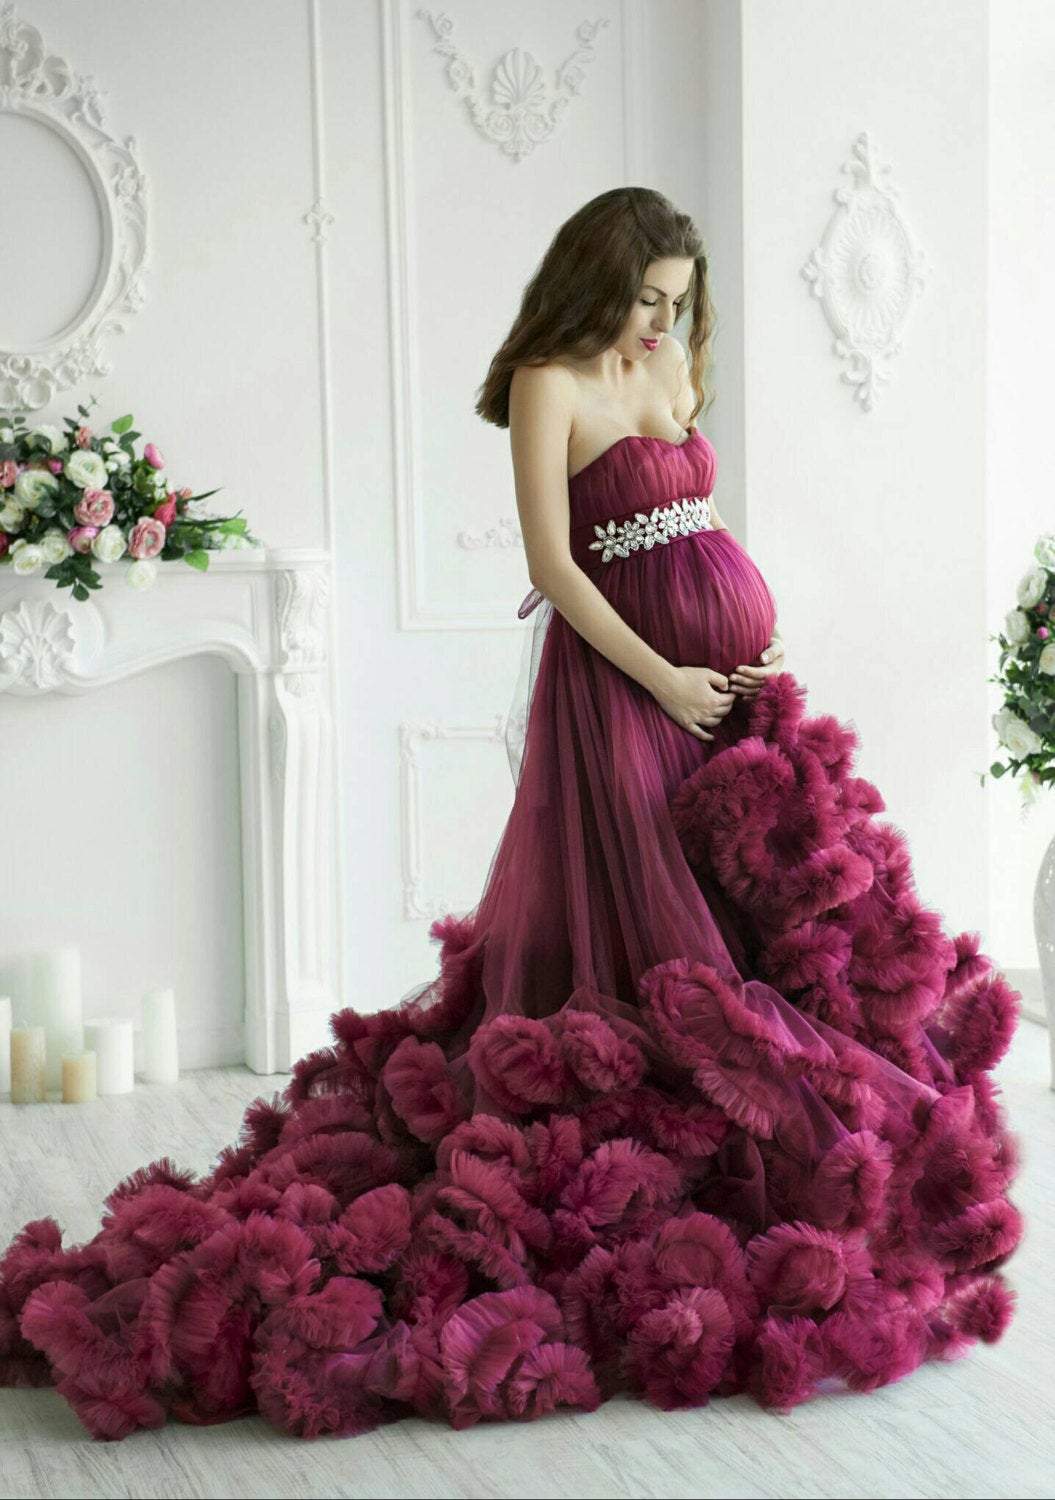 Top 13 Dress Ideas For Your Maternity Photoshoot